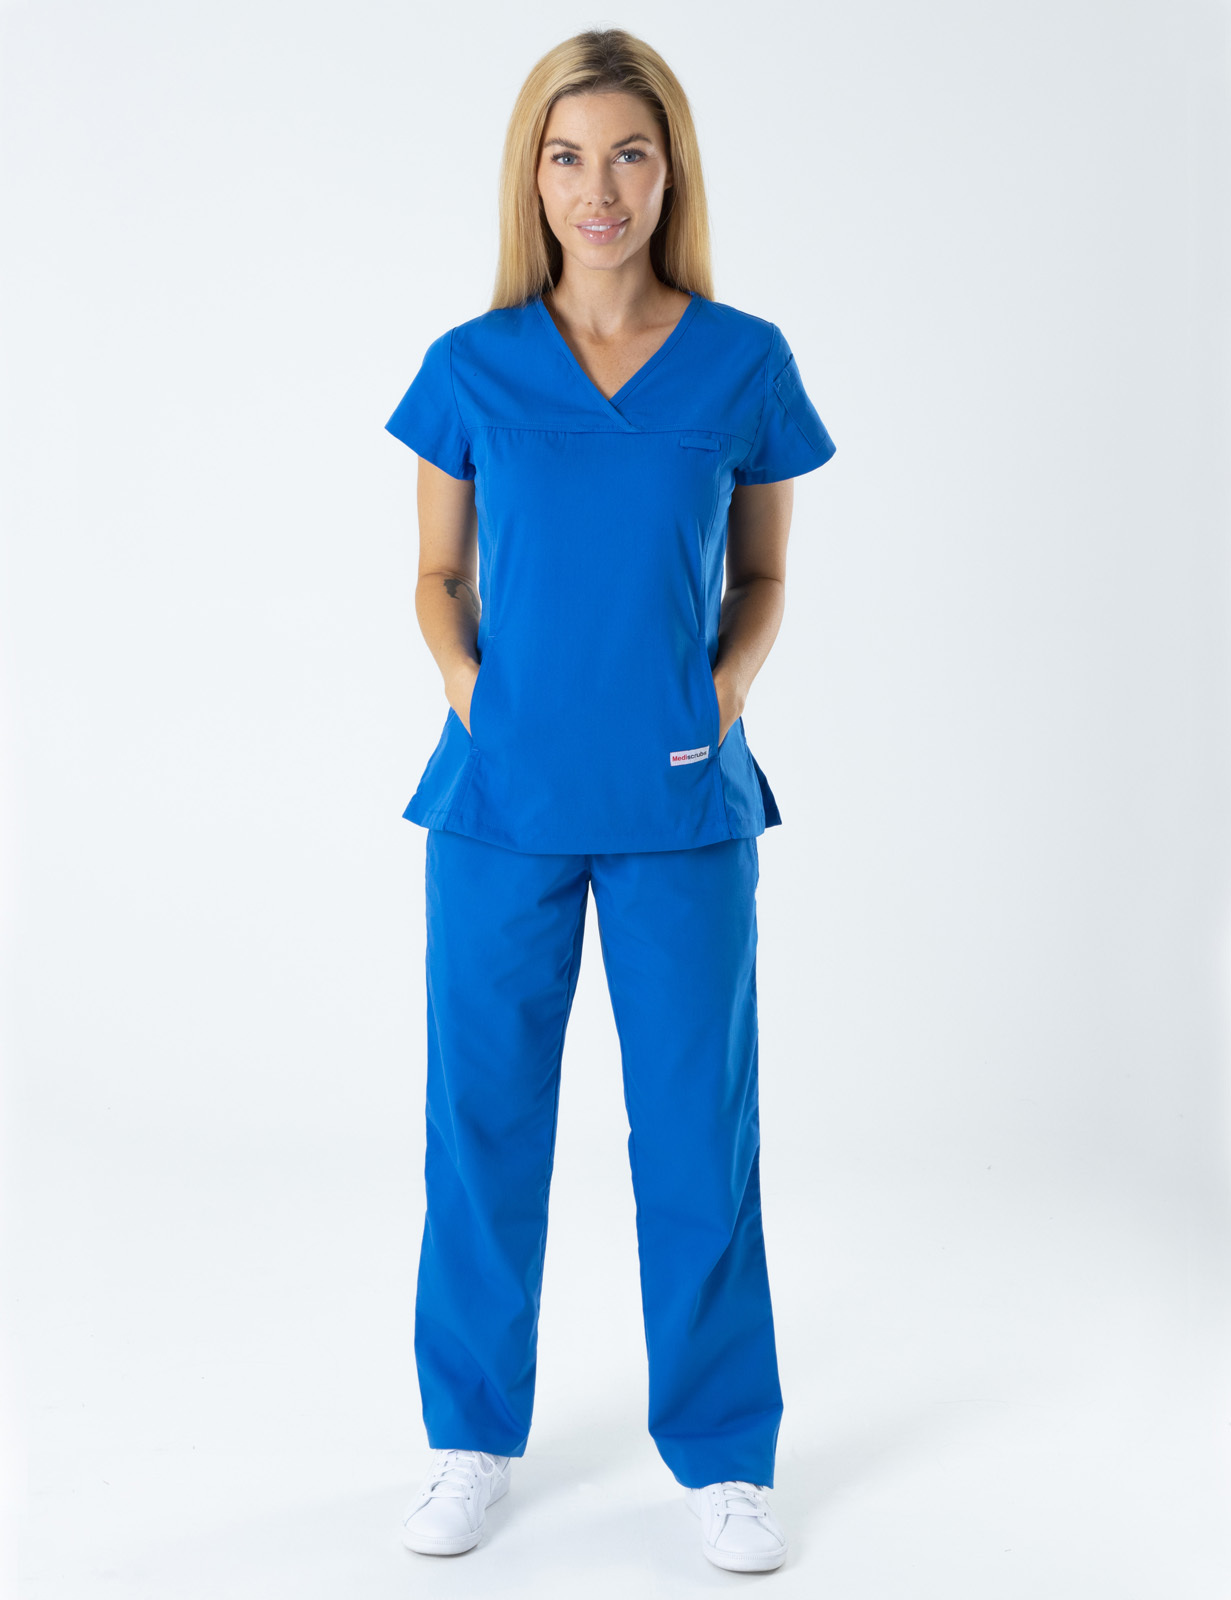 PAH - Endoscopy RN (Women's Fit Solid Scrub Top and Cargo Pants in Royal incl Logos)